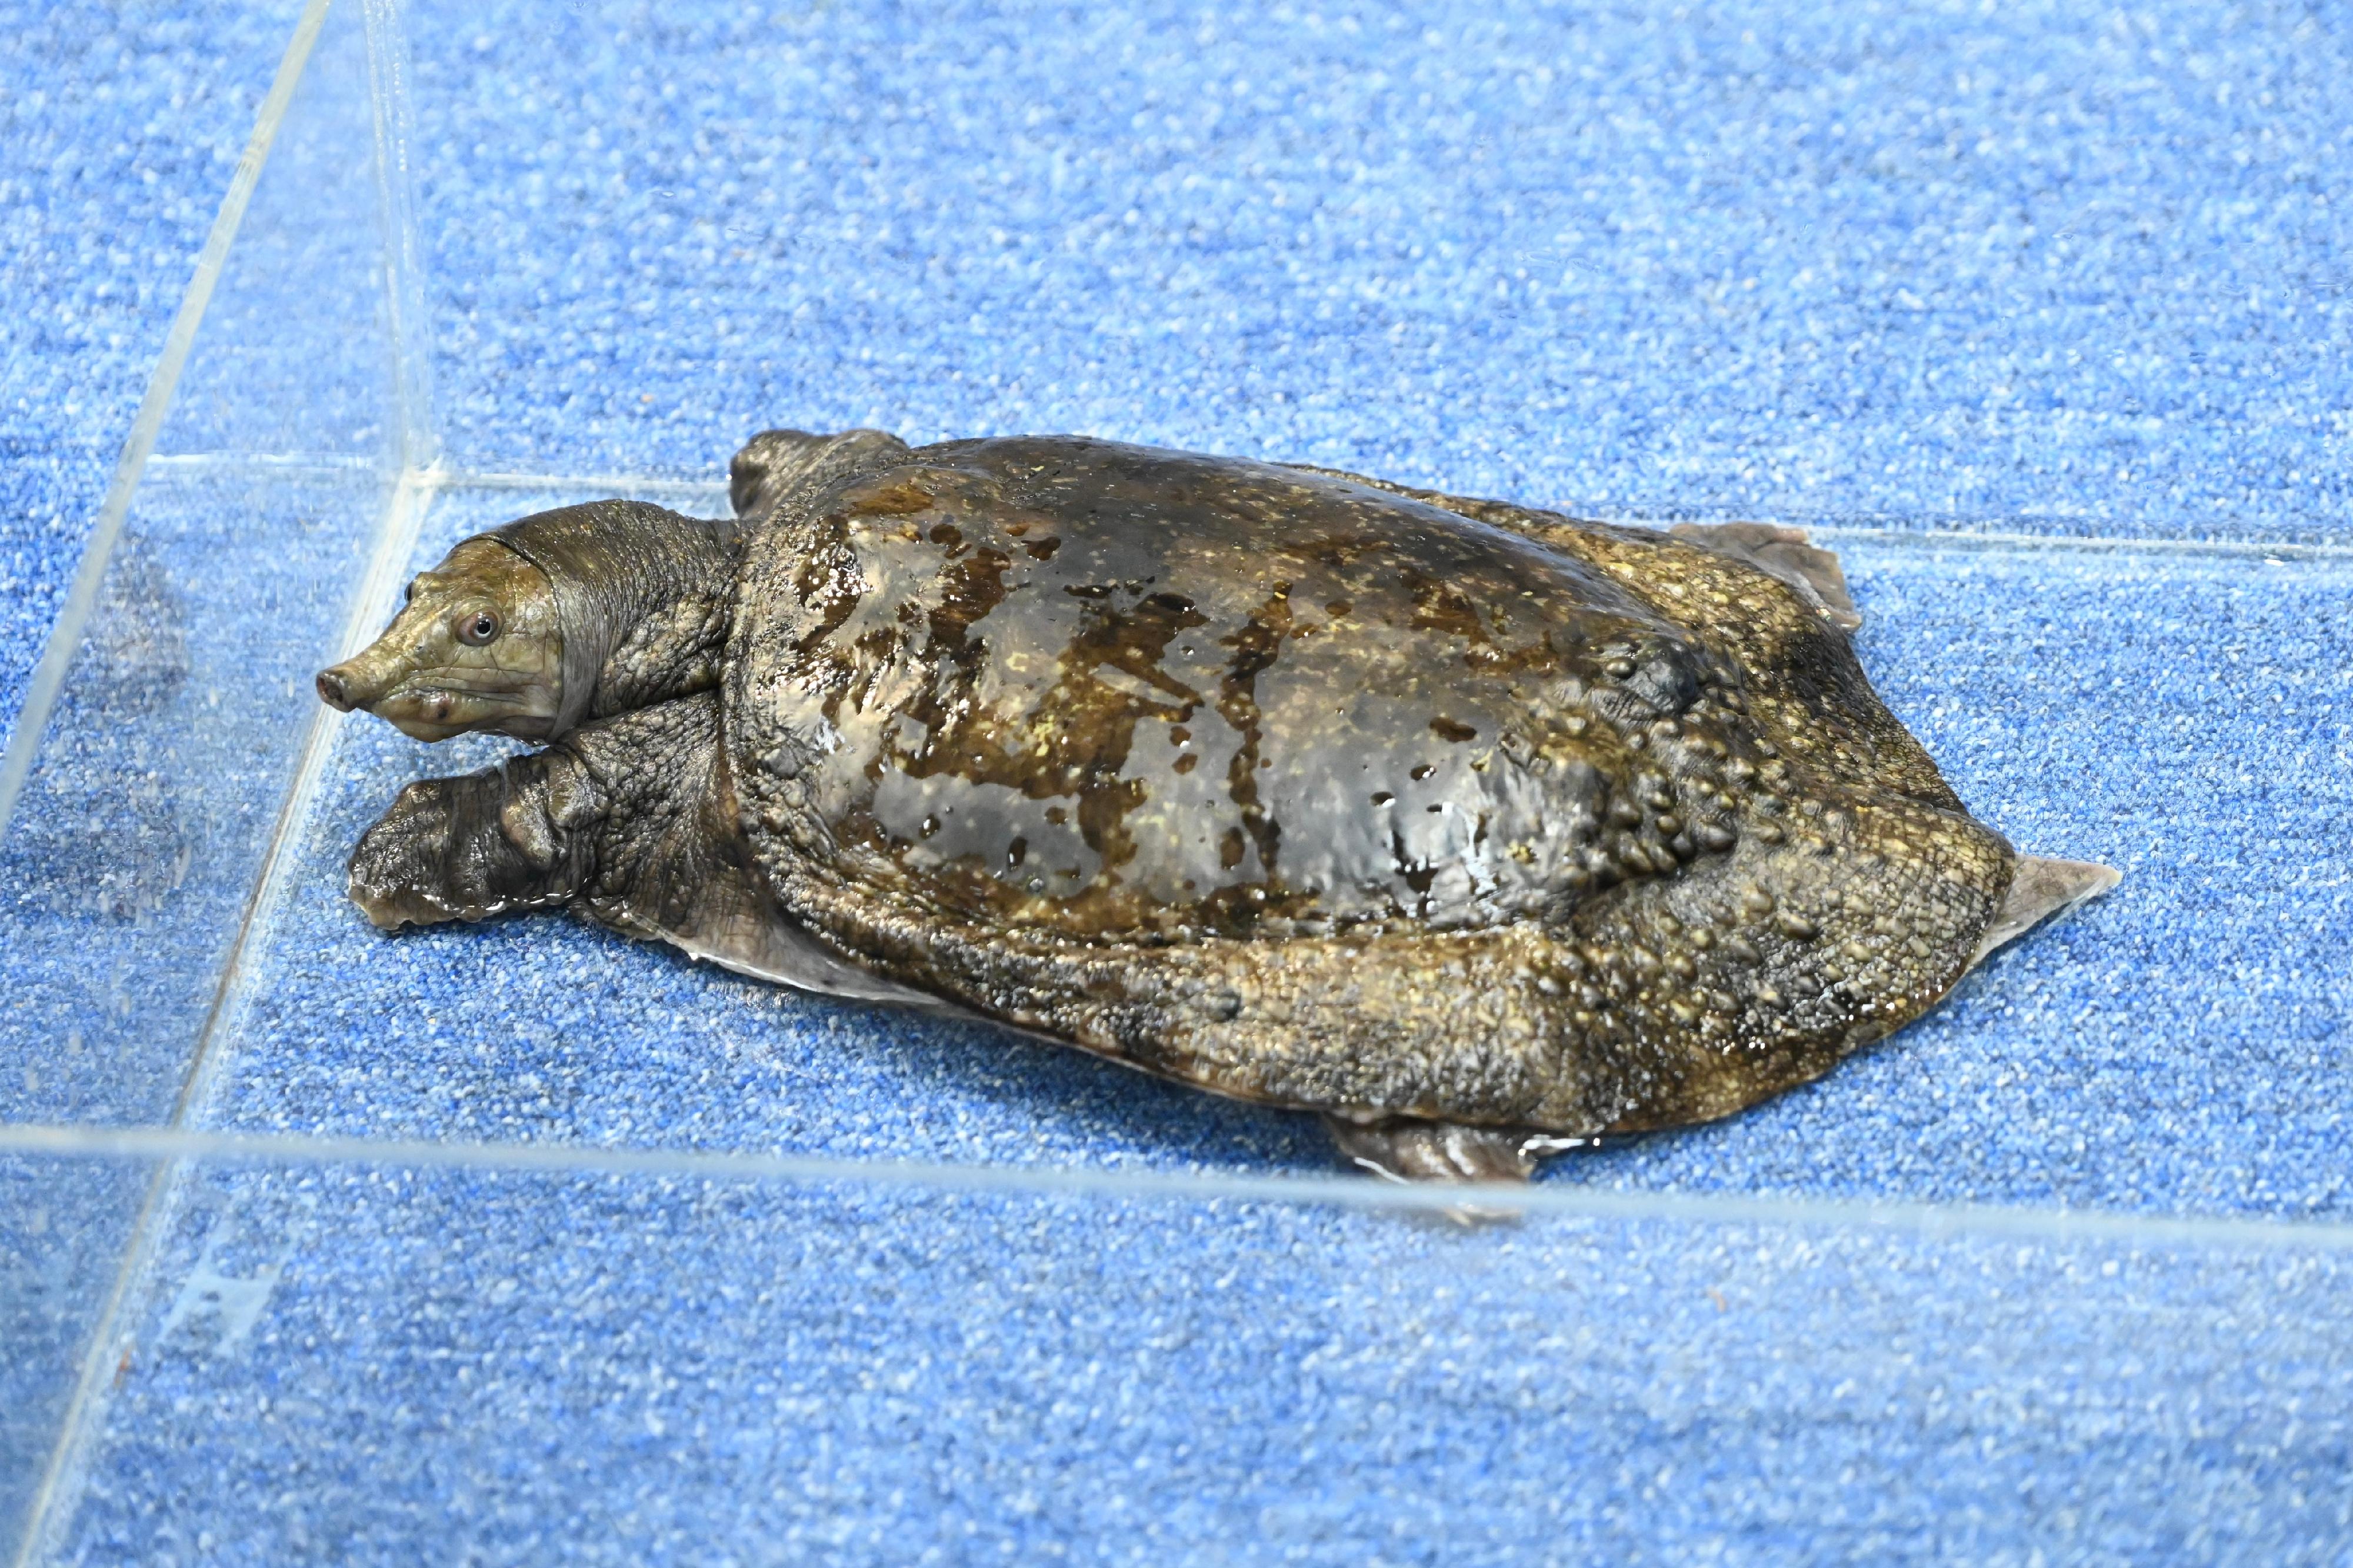 The Agriculture, Fisheries and Conservation Department conducted a joint operation with the Hong Kong Police Force on May 17 on a case of suspected illegal possession of endangered species. Thirty-one specimens of turtles suspected of being illegally possessed were seized on a premises. Photo shows a wattle-necked softshell turtle (Palea steindachneri), which is listed on Appendix II to the Convention on International Trade in Endangered Species of Wild Fauna and Flora, seized by the officers.